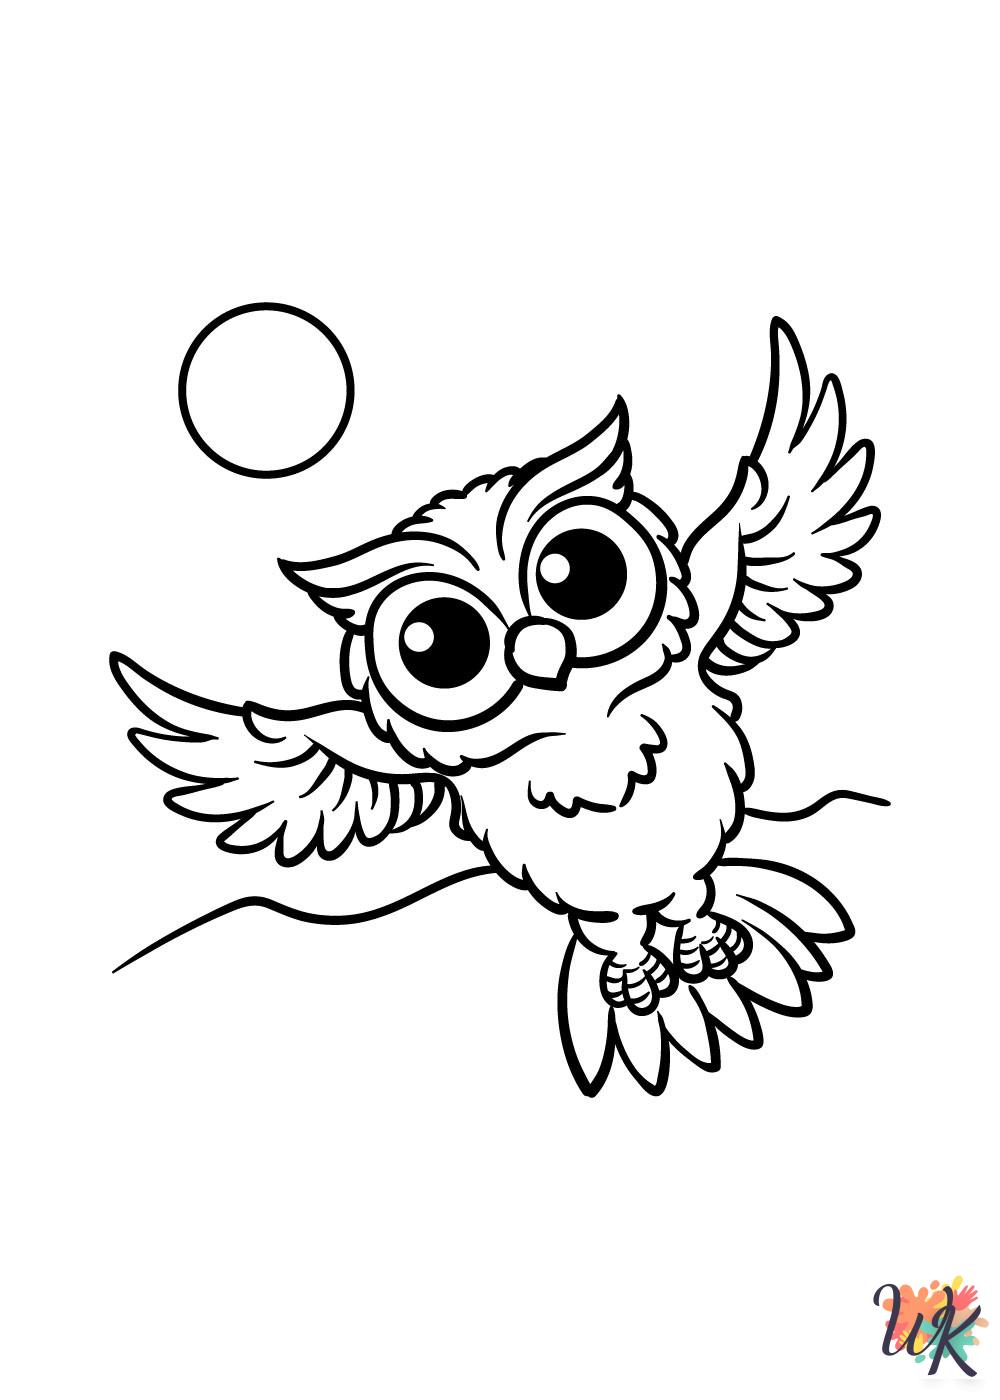 Owl ornaments coloring pages